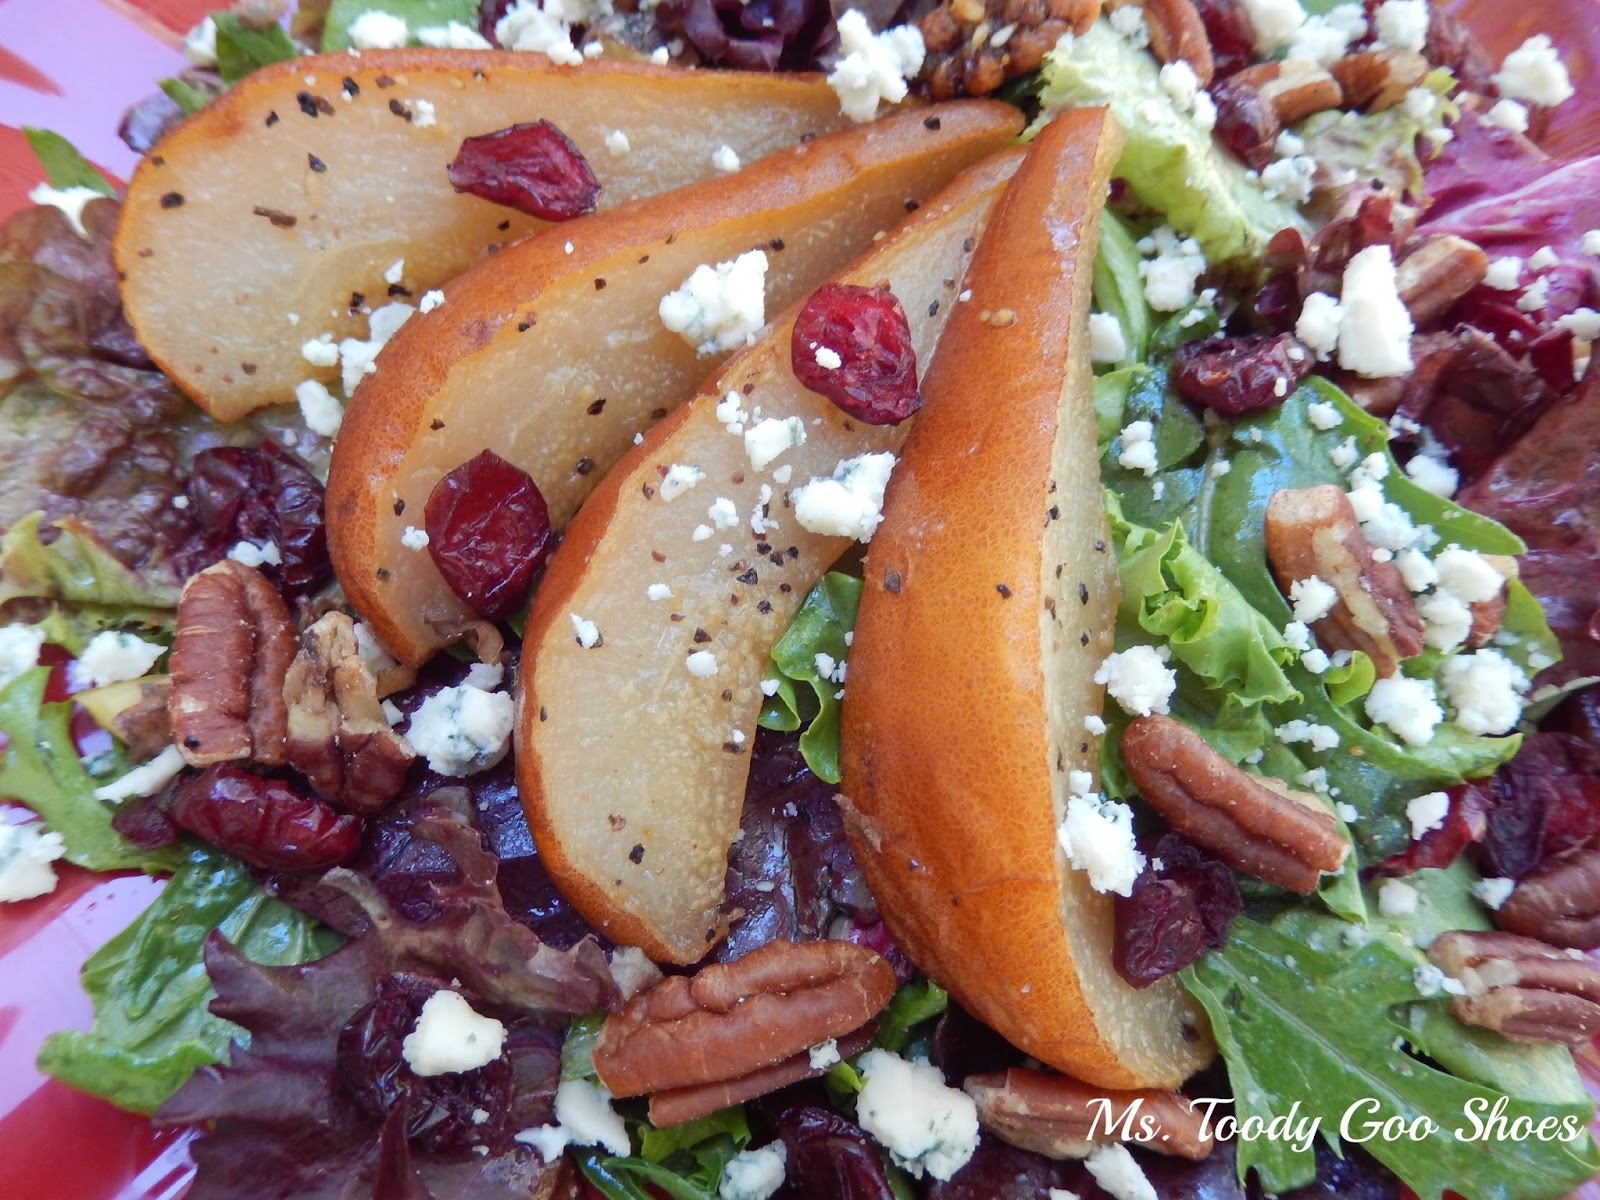 Roasted Pear Salad with White Balsamic Vinaigrette by Ms. Toody Goo Shoes